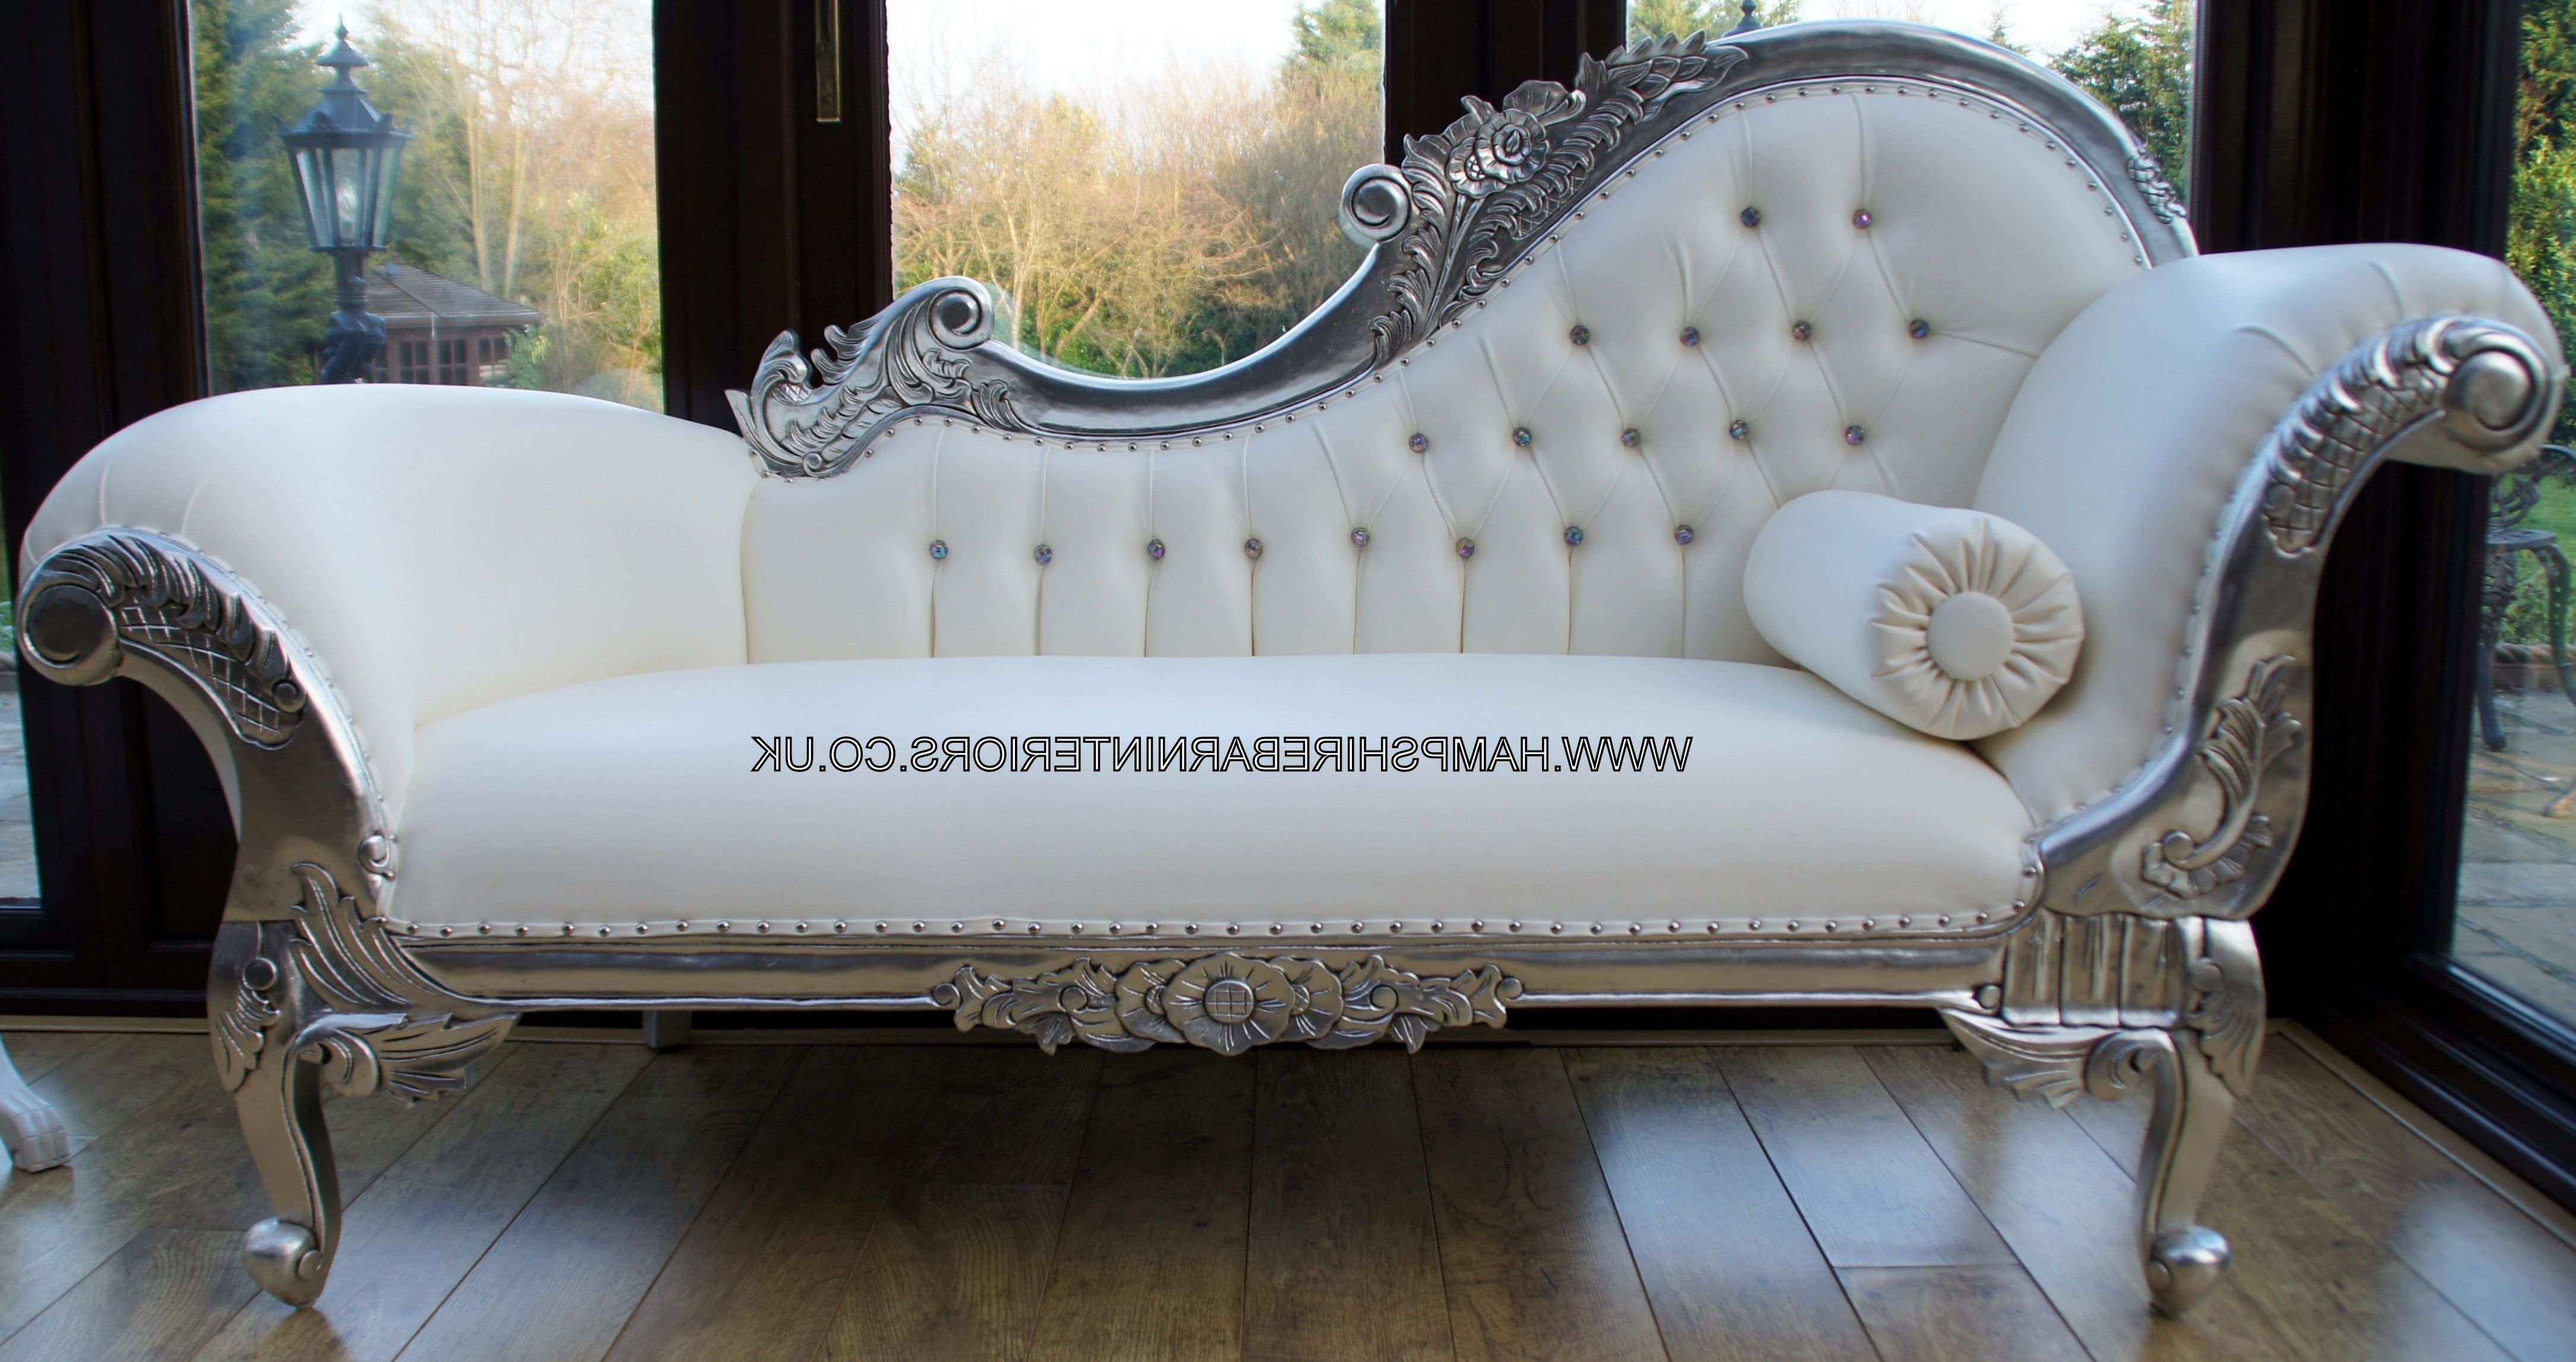 Fashionable White Chaise Lounges Intended For Chaise Lounge Chair White Leather • Lounge Chairs Ideas (View 2 of 15)